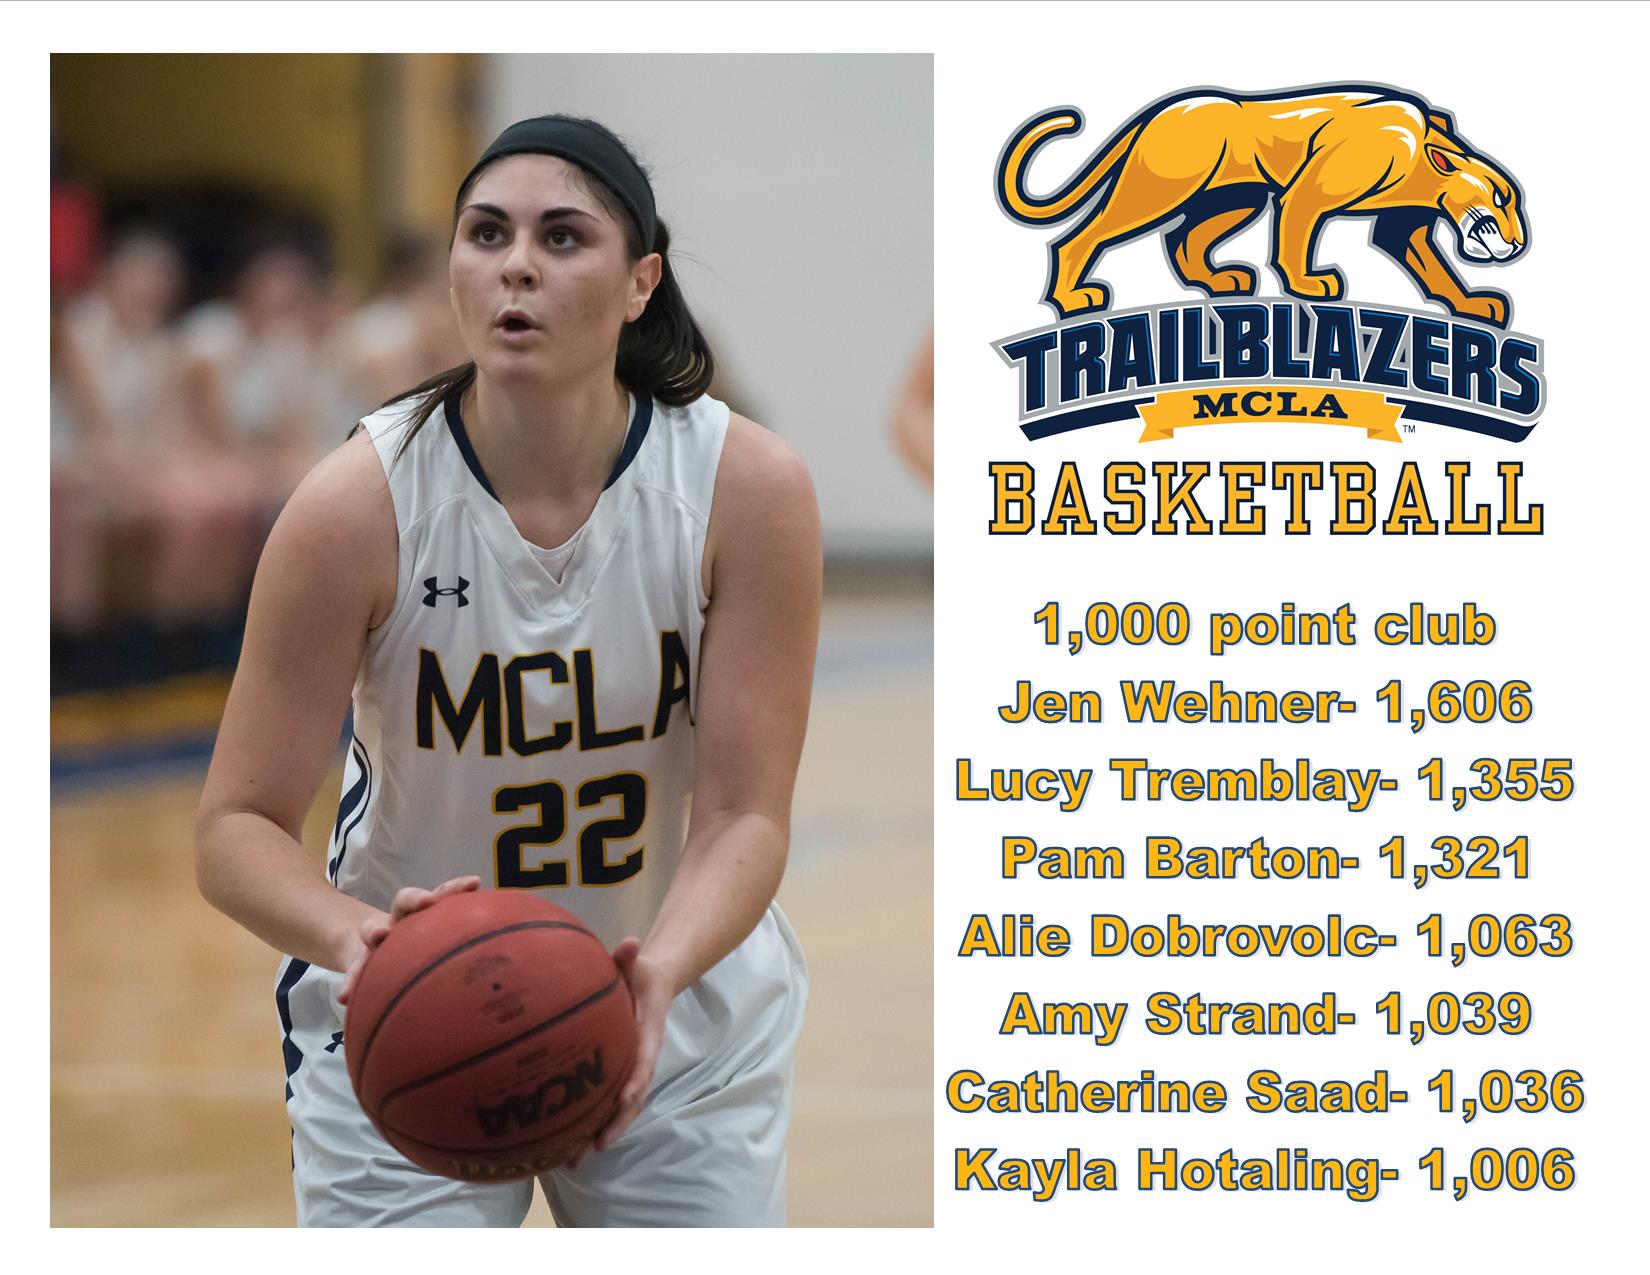 Hotaling reaches 1,000 points, Vincent nets career high in Trailblazer win over SVC